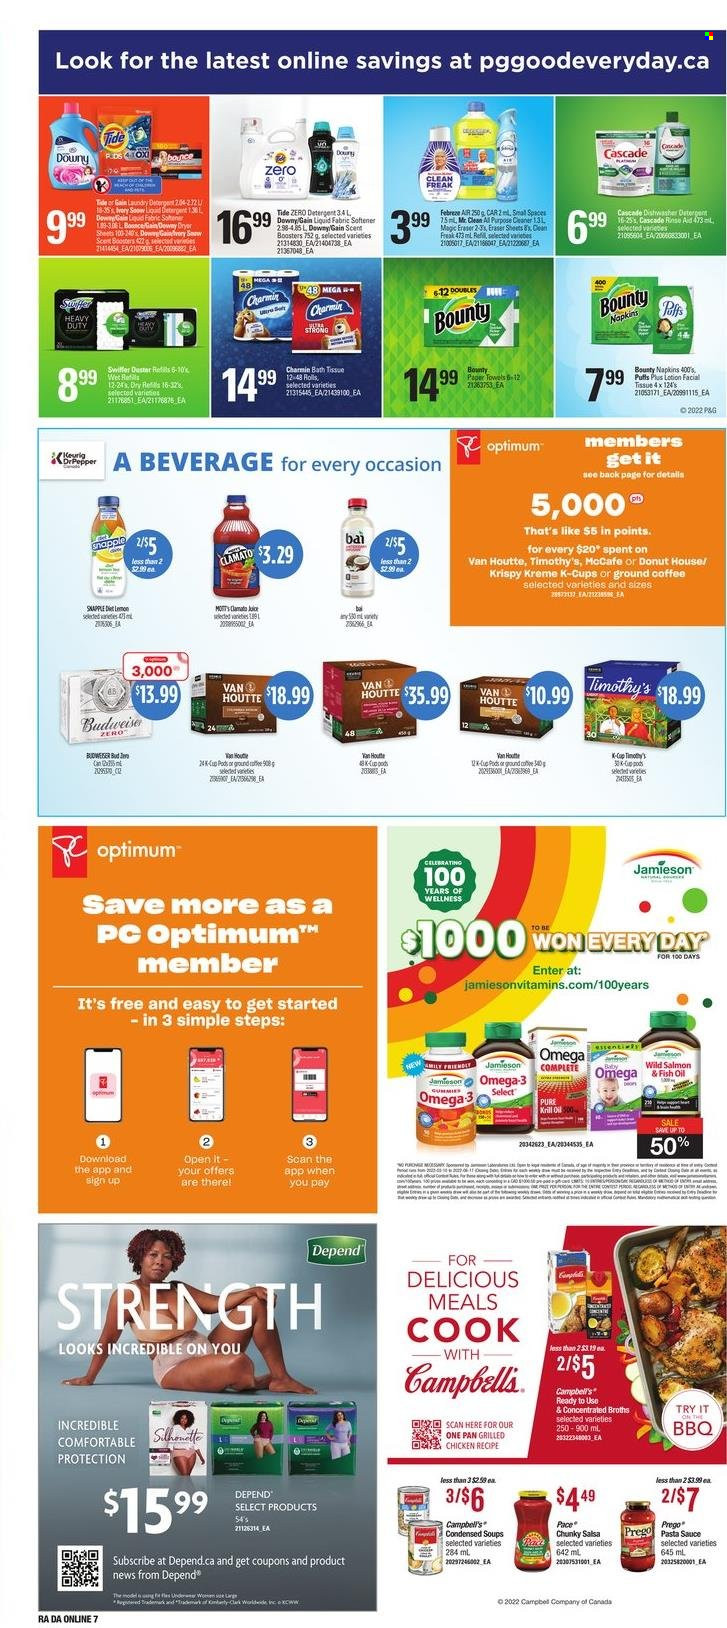 thumbnail - Dominion Flyer - May 19, 2022 - May 25, 2022 - Sales products - salmon, Campbell's, pasta sauce, sauce, Bounty, salsa, oil, Clamato, coffee, ground coffee, coffee capsules, K-Cups, napkins, tissues, kitchen towels, paper towels, Charmin, Gain, Swiffer, Tide, liquid detergent, Cascade, dryer sheets, scent booster, pan, eraser, Optimum, fish oil, Omega-3, detergent, deodorant. Page 13.